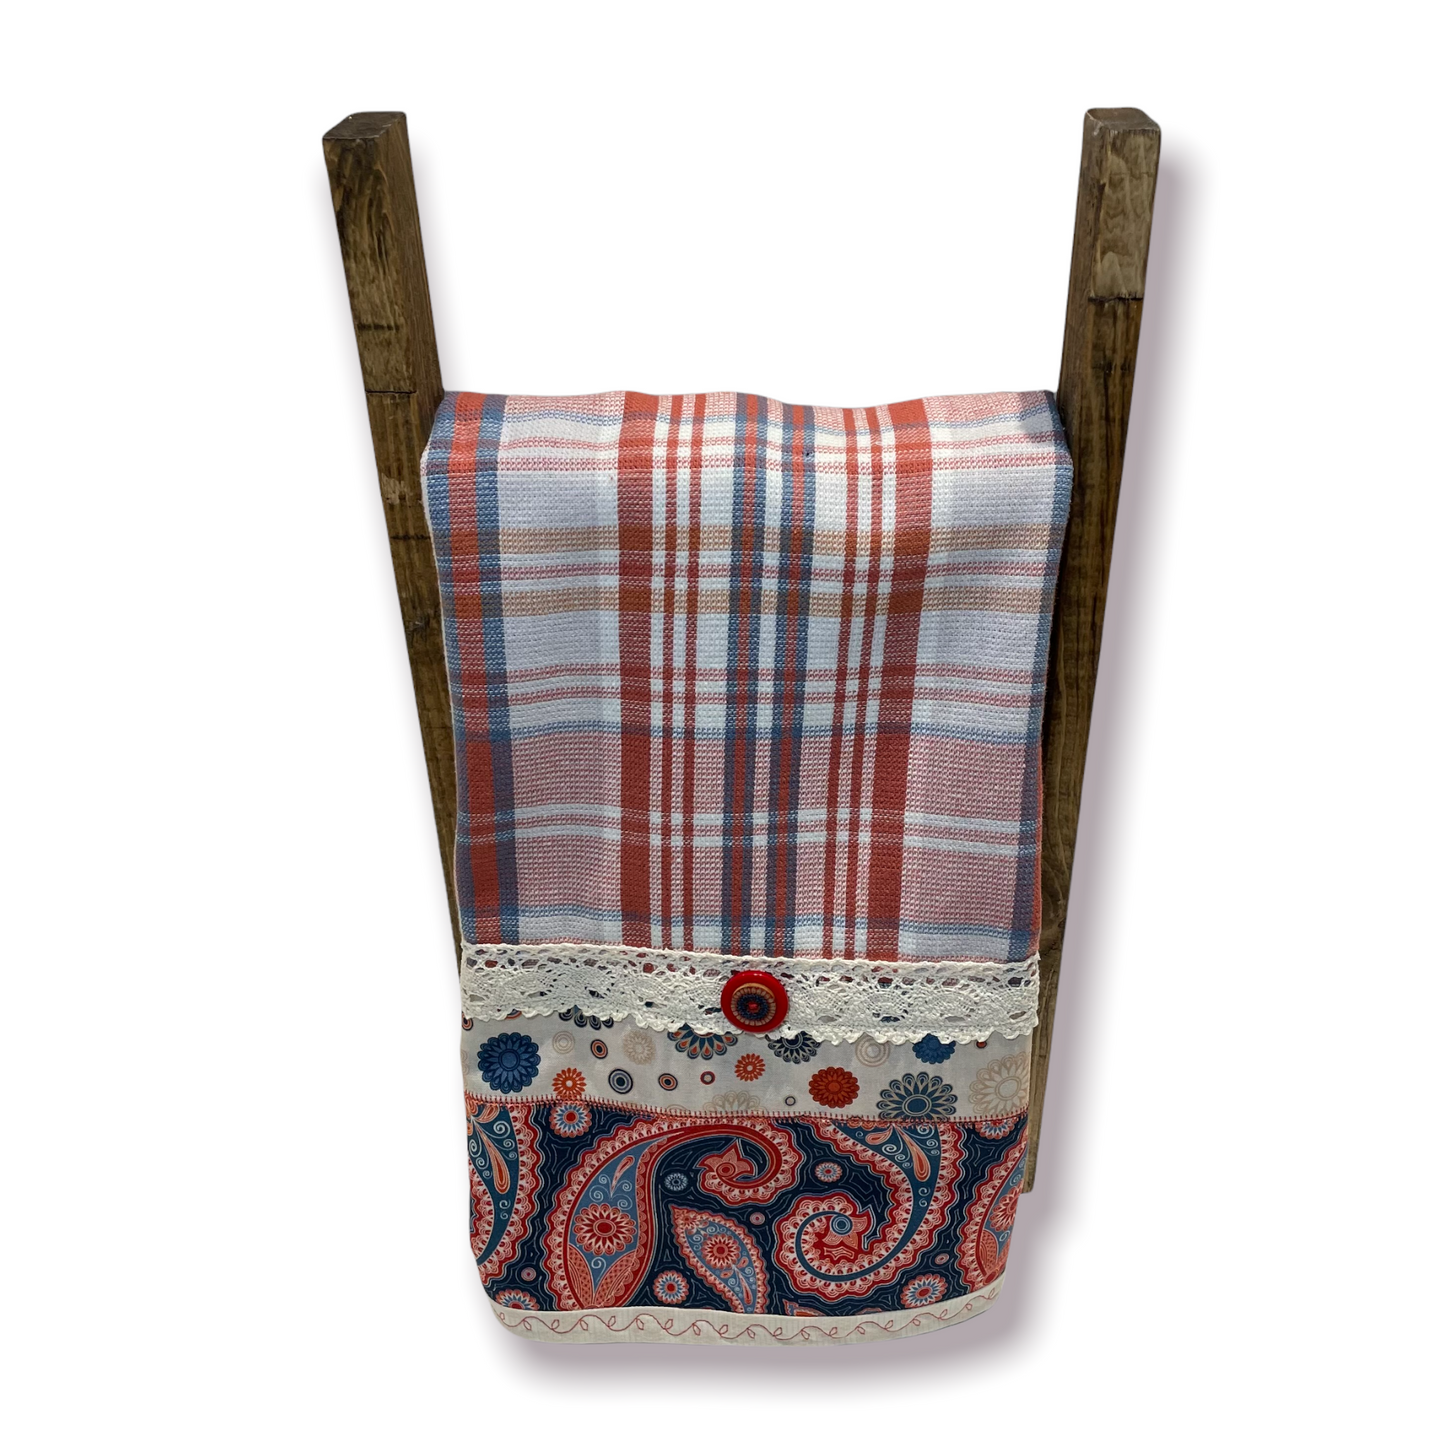 Decorative Dish Towel handcrafted by Home Stitchery Decor. Dress up your kitchen with stylish tea towels you cannot find in major stores! Shop your favorites or make your own with tutorials on the Home Stitchery Decor YouTube Channel.